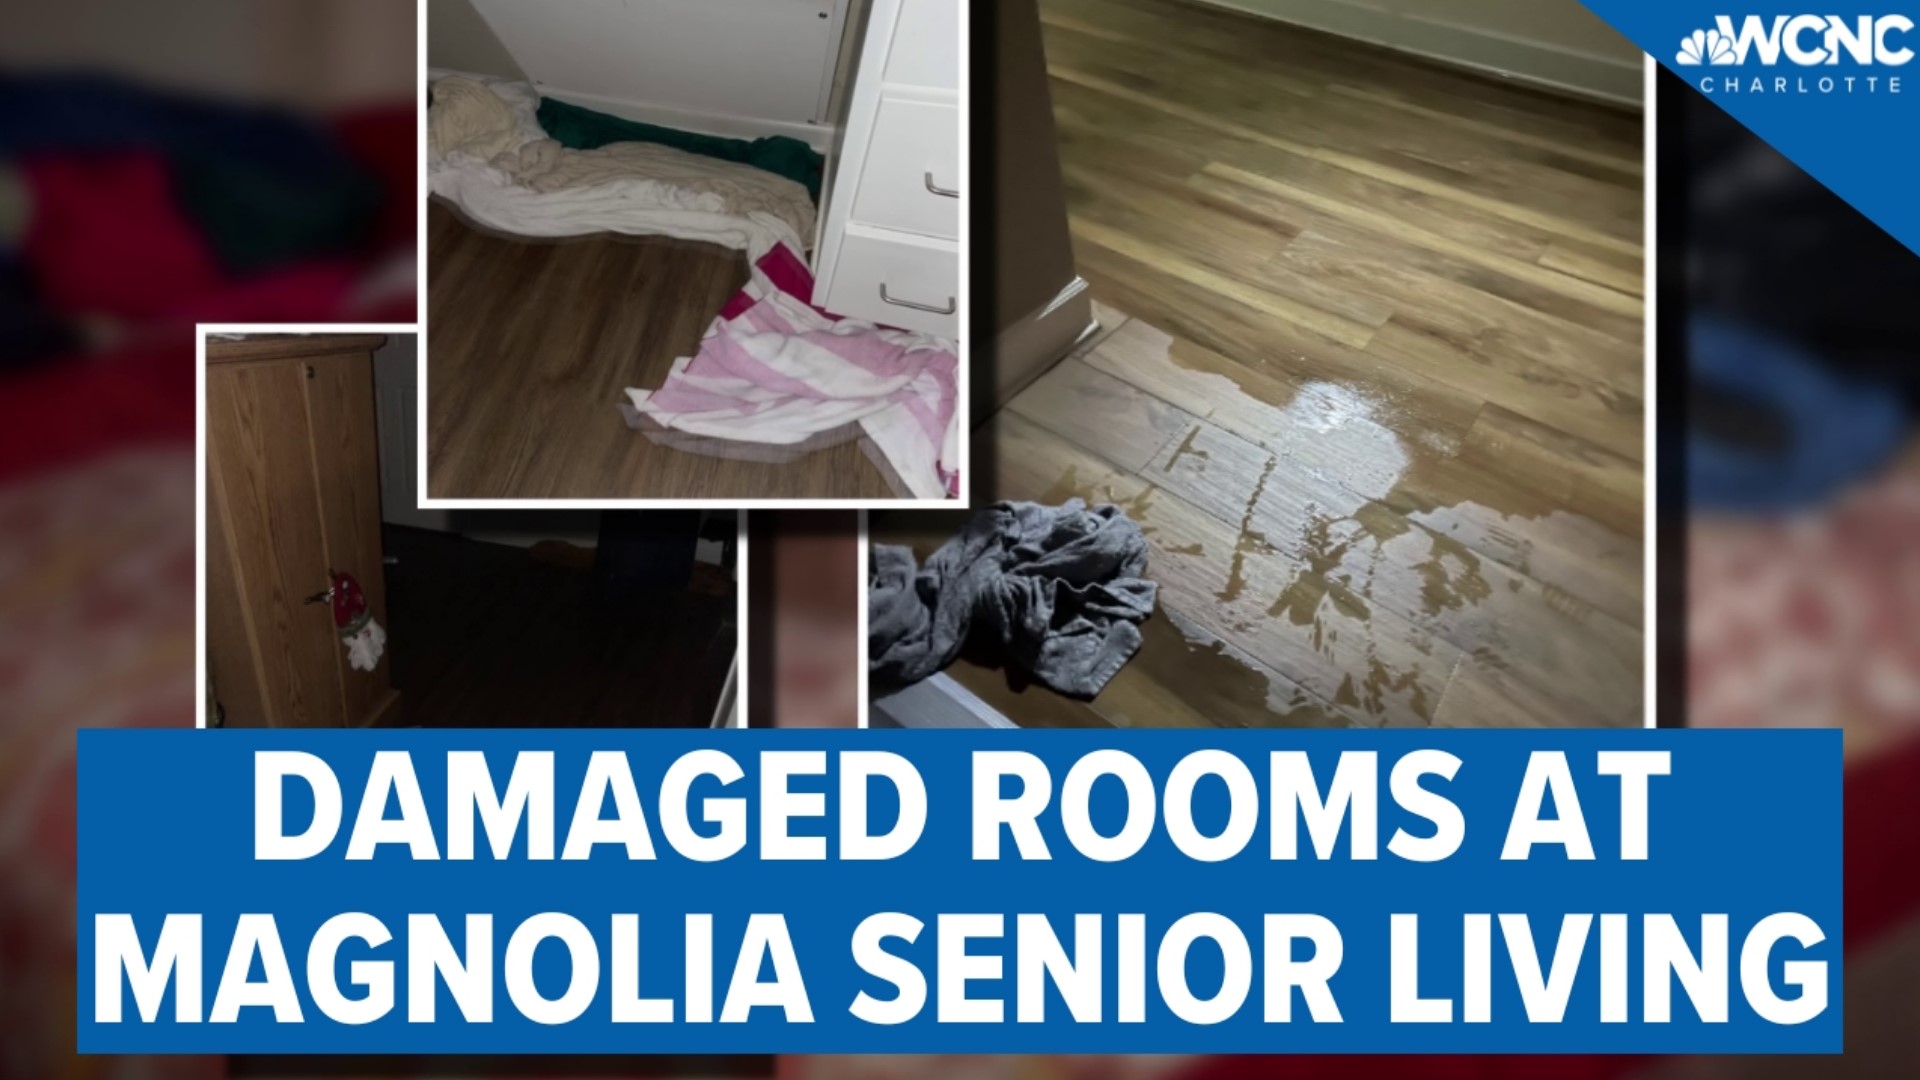 Residents of Magnolia Senior Apartments have been displaced without access to their belongings for over two weeks after burst pipe.